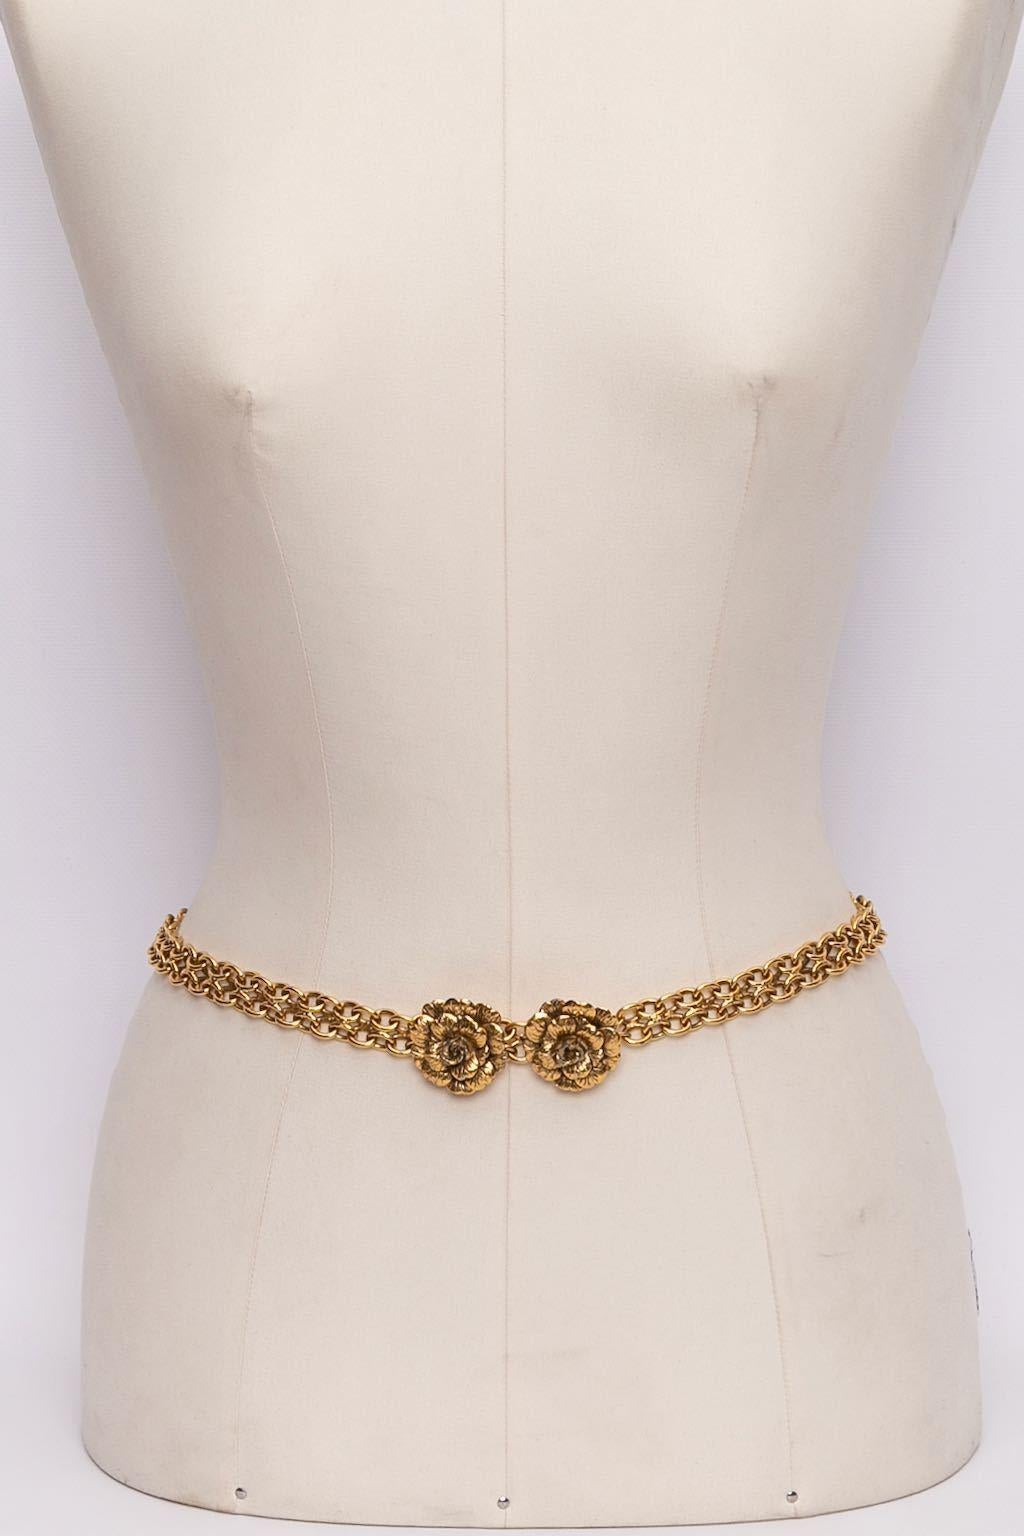 Chanel- Camellia belt in gilded metal. Signature engraved at the back of the buckle.

Additional information: 
Dimensions: Length: 71 cm (27.95 in) 
Condition: Very good condition
Seller Ref number: CCB44